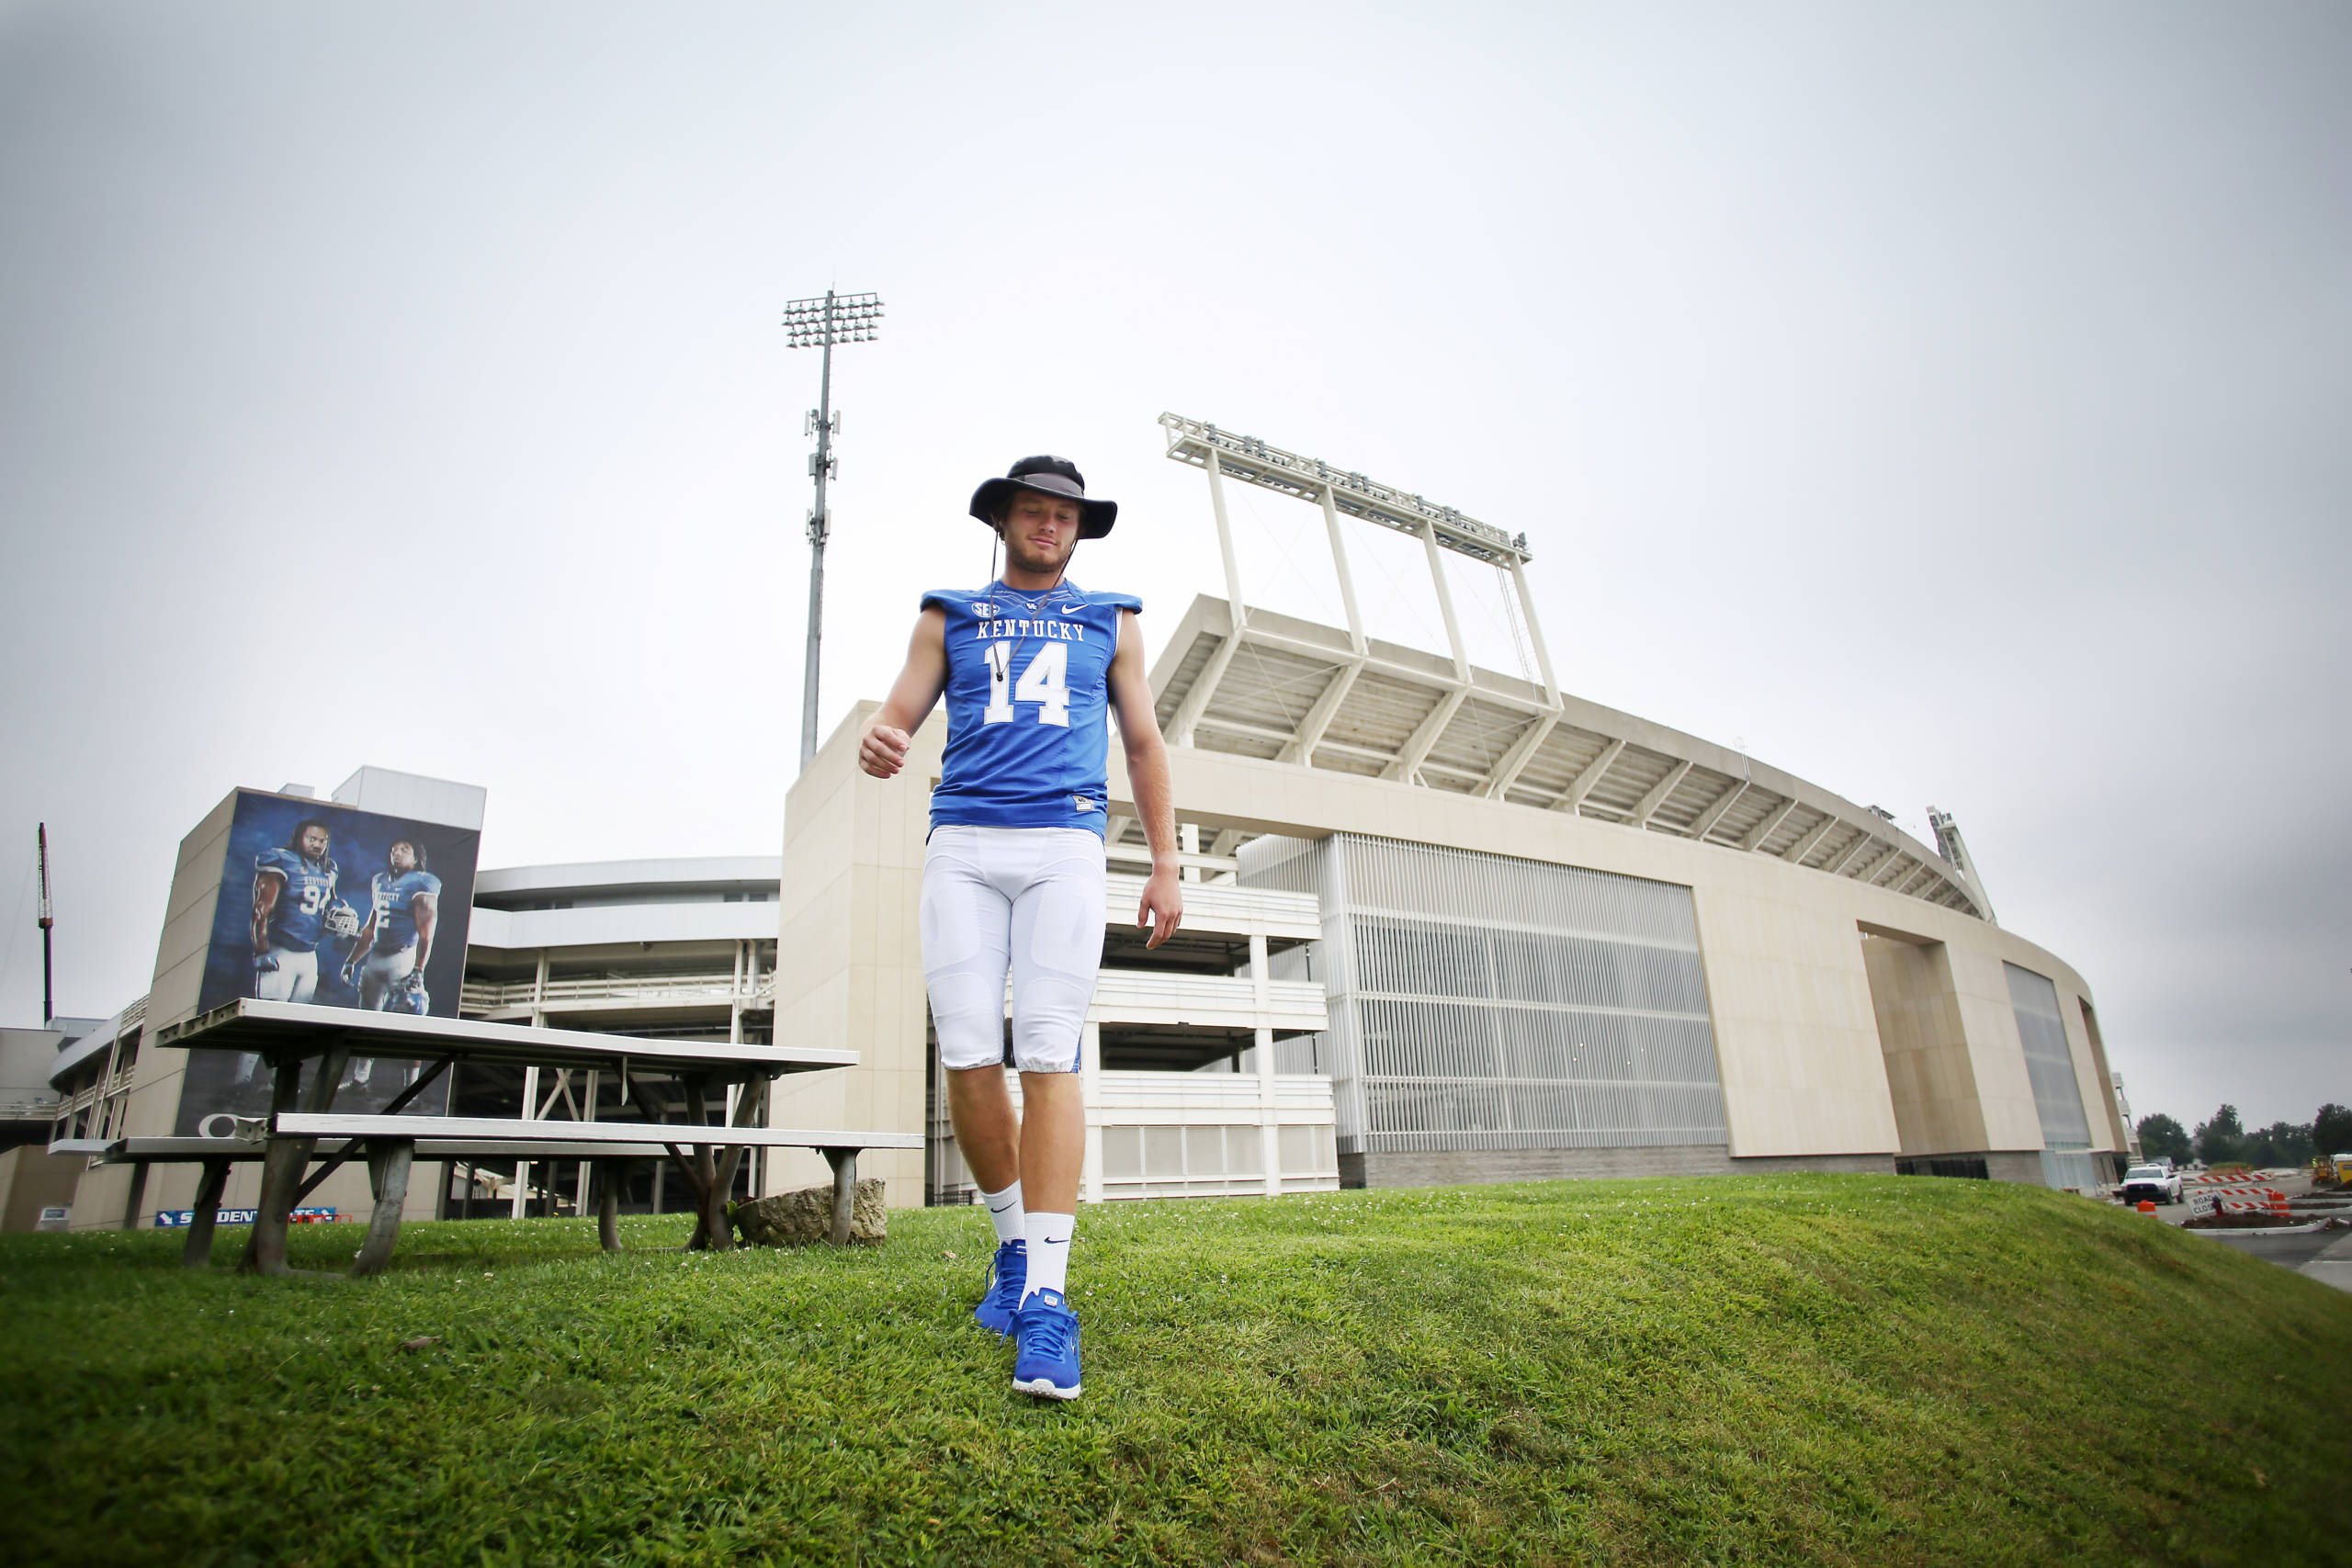 Towles, Barker both improved as QB competition begins